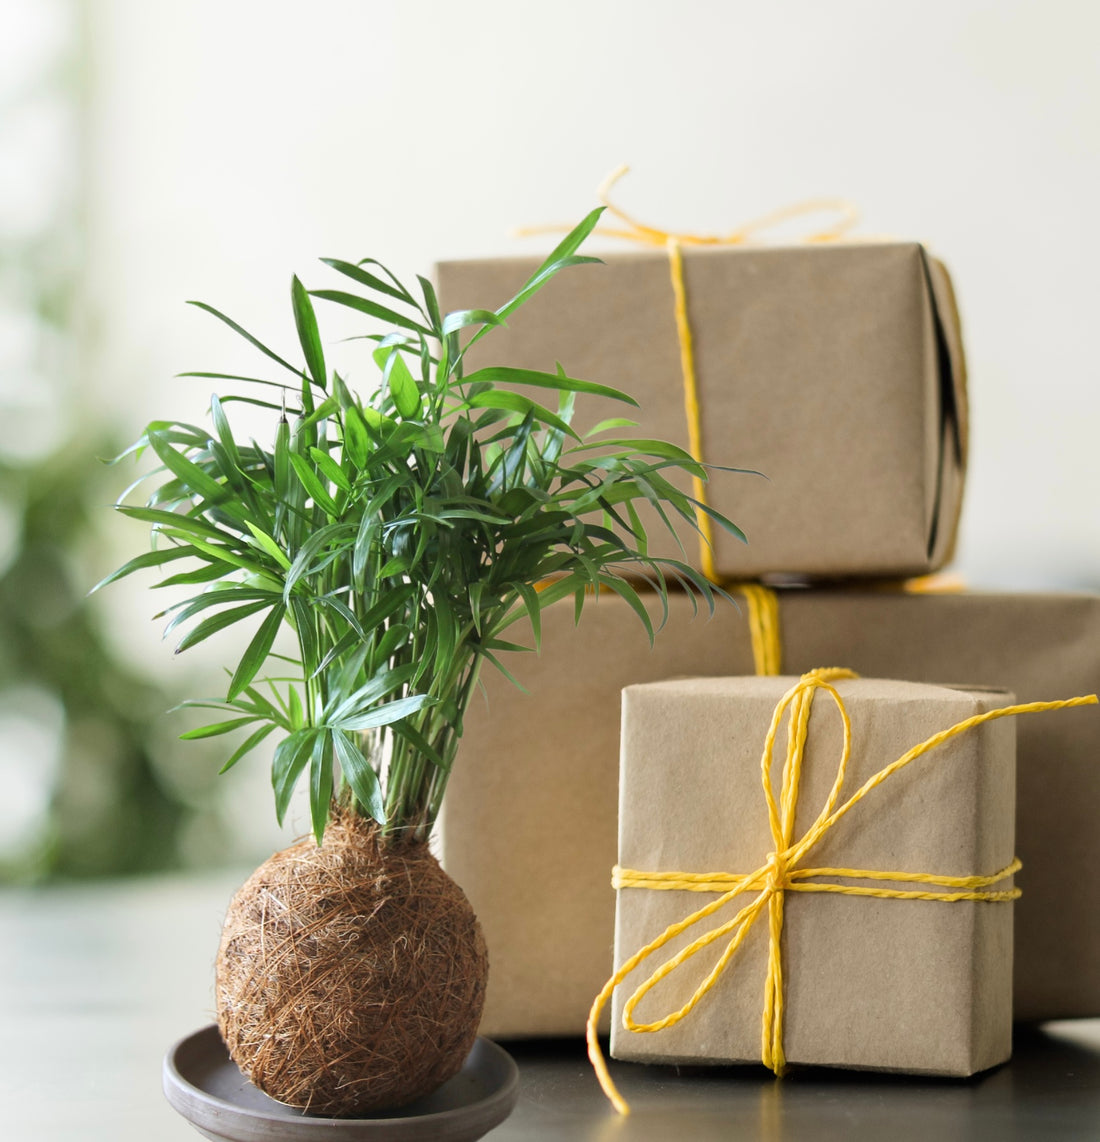 Corporate plant gifts Kokedama. Gifts and presents for clients and employees. Kokedama Houseplants, Parlour Palm